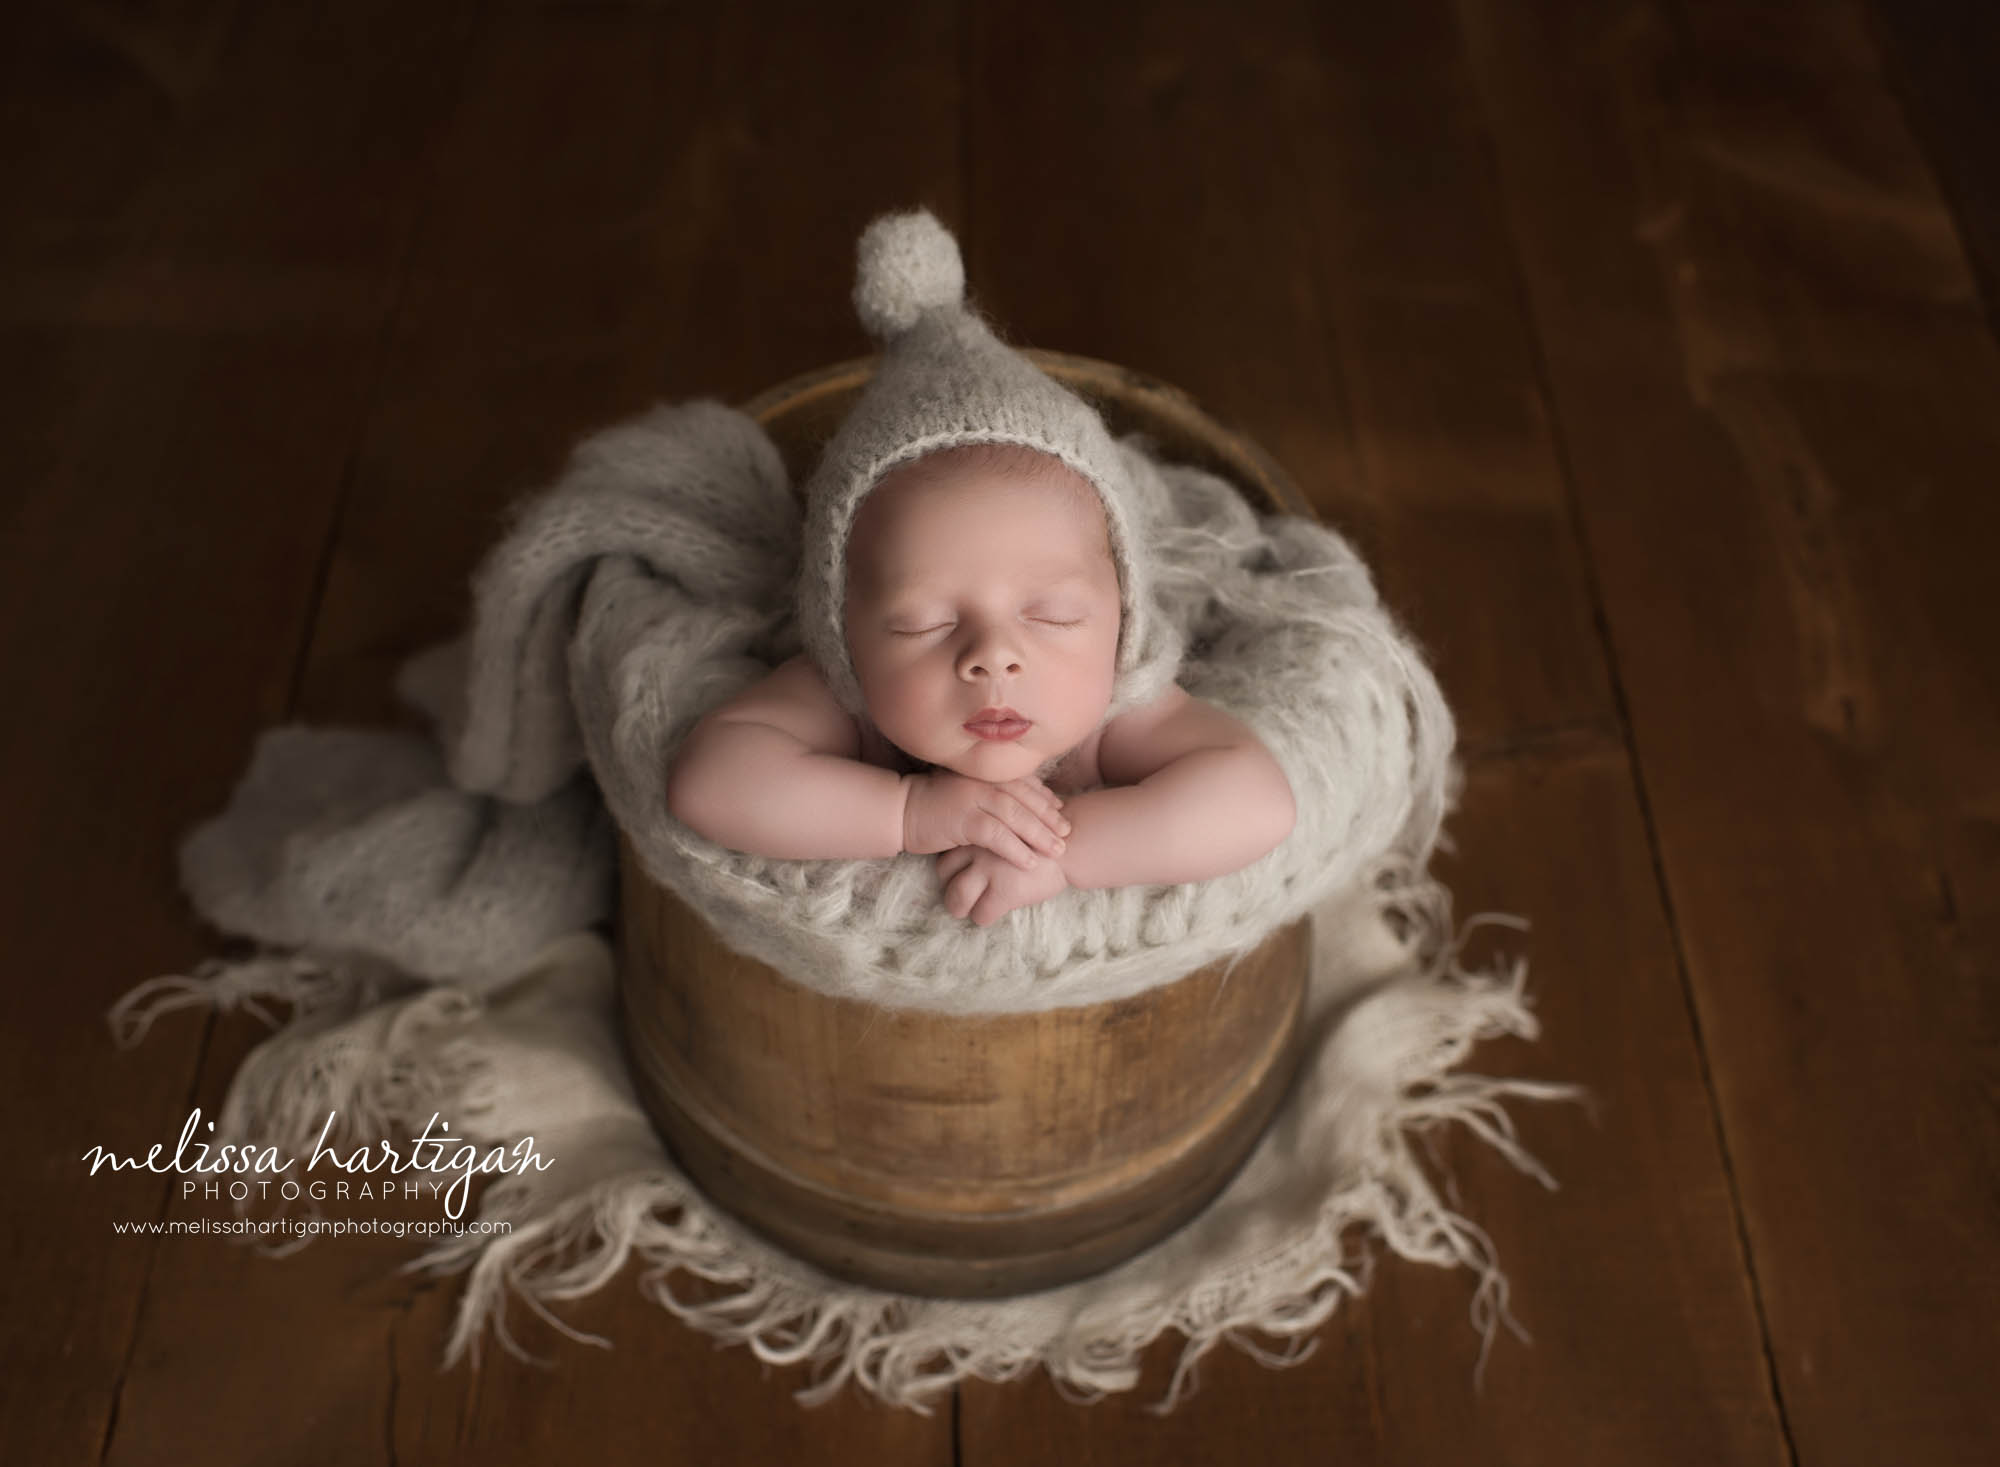 newborn baby boy posed in wooden barrel with gray knited wrap layer wearing pom pom bonnet